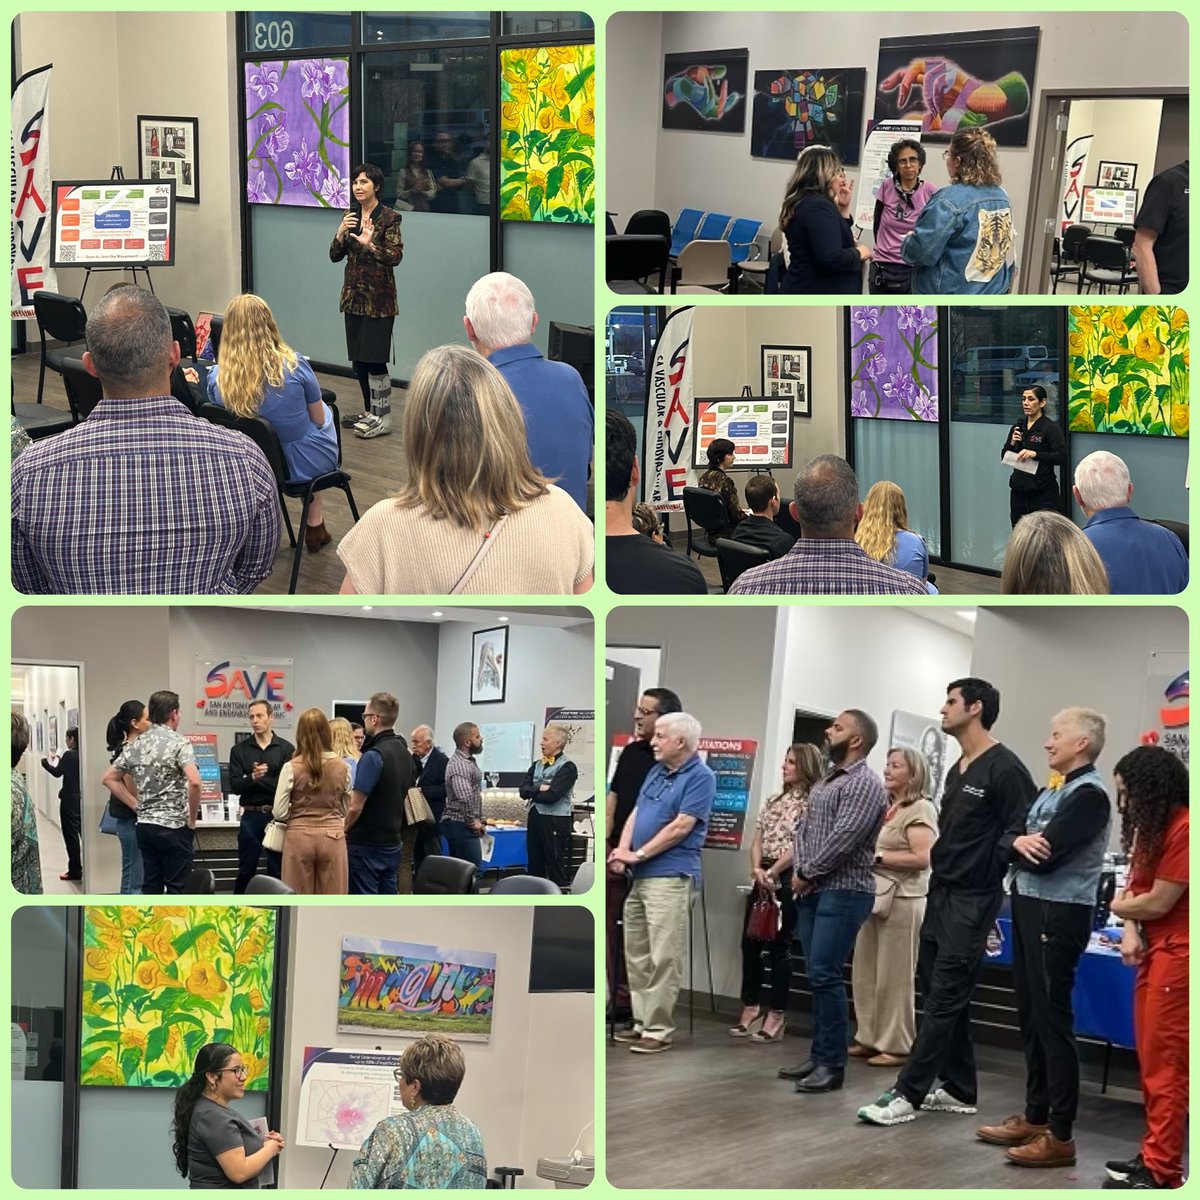 Thanks to everyone who took time to celebrate the unveiling of @sabrabooth2’s Herbal Traces installation at our office Friday! All those who couldn’t attend are welcome to come enjoy #ArtAsMedicine at your convenience, M-F, 8a-5p. Shoutout @COSAGOV’s commitment to art! #SDoH